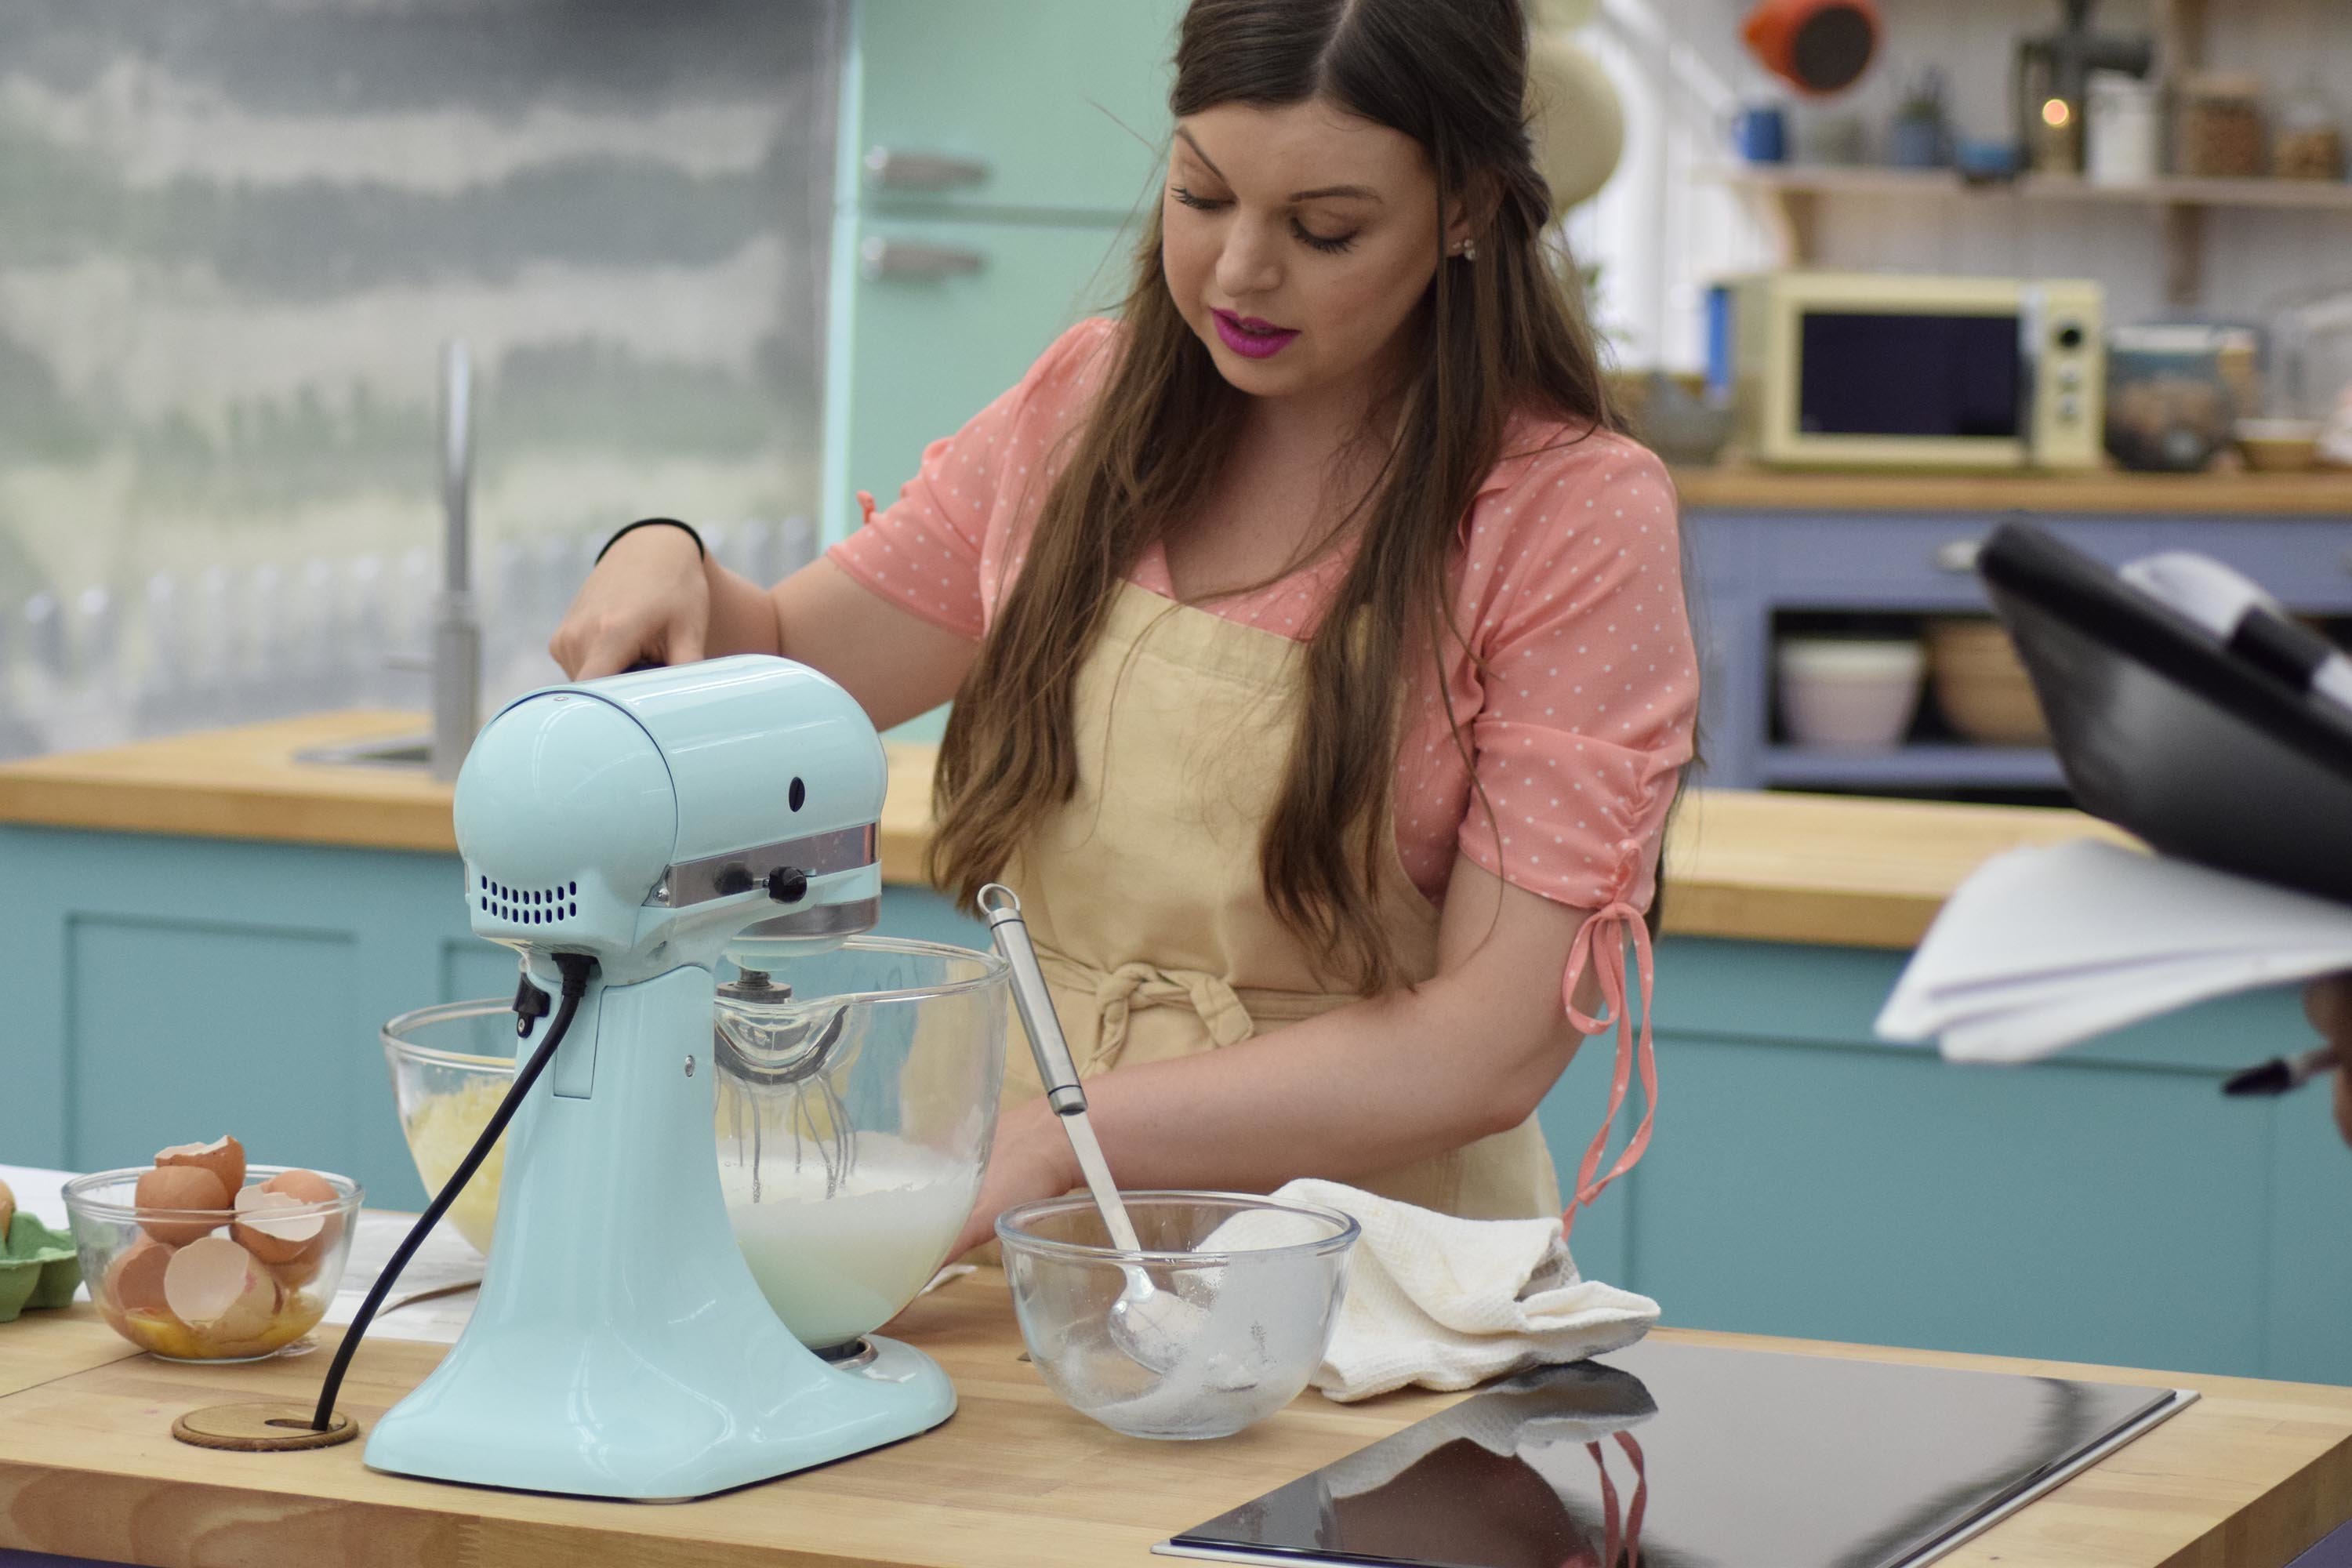 29-year-old Kate Lyon has made it through to this year's 'Bake Off final